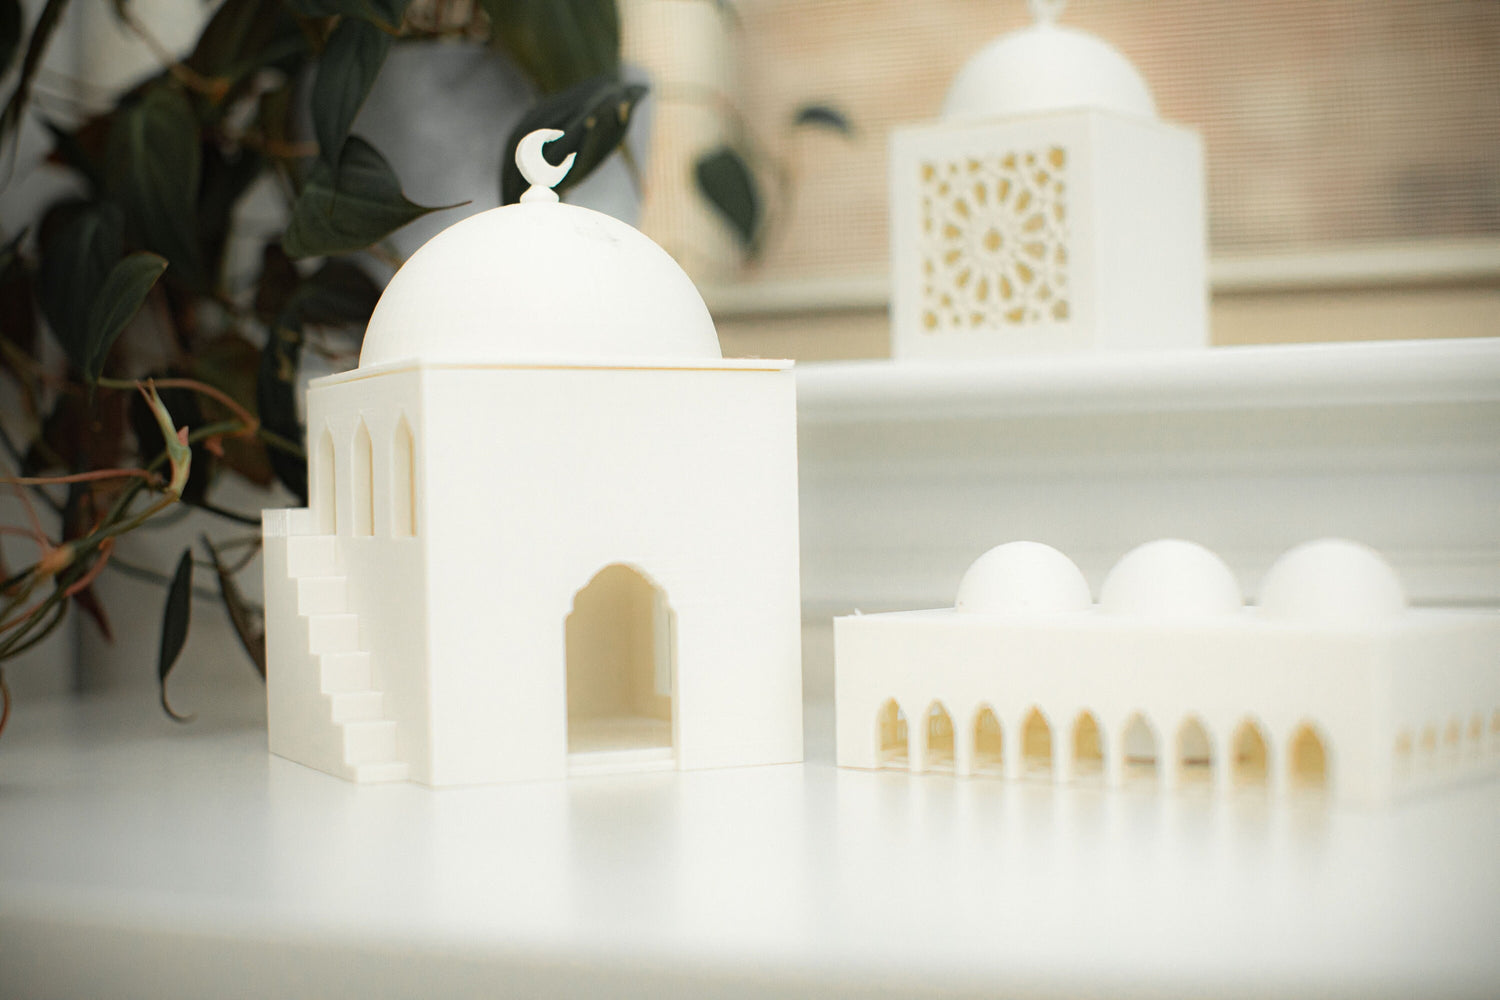 Set of 3 Islamic Home Decor - Mini Arched Masjid Lantern Boxes | Al-Noor Collection - Madinah Mansion, Qubba Courtyard, and Girih Palace